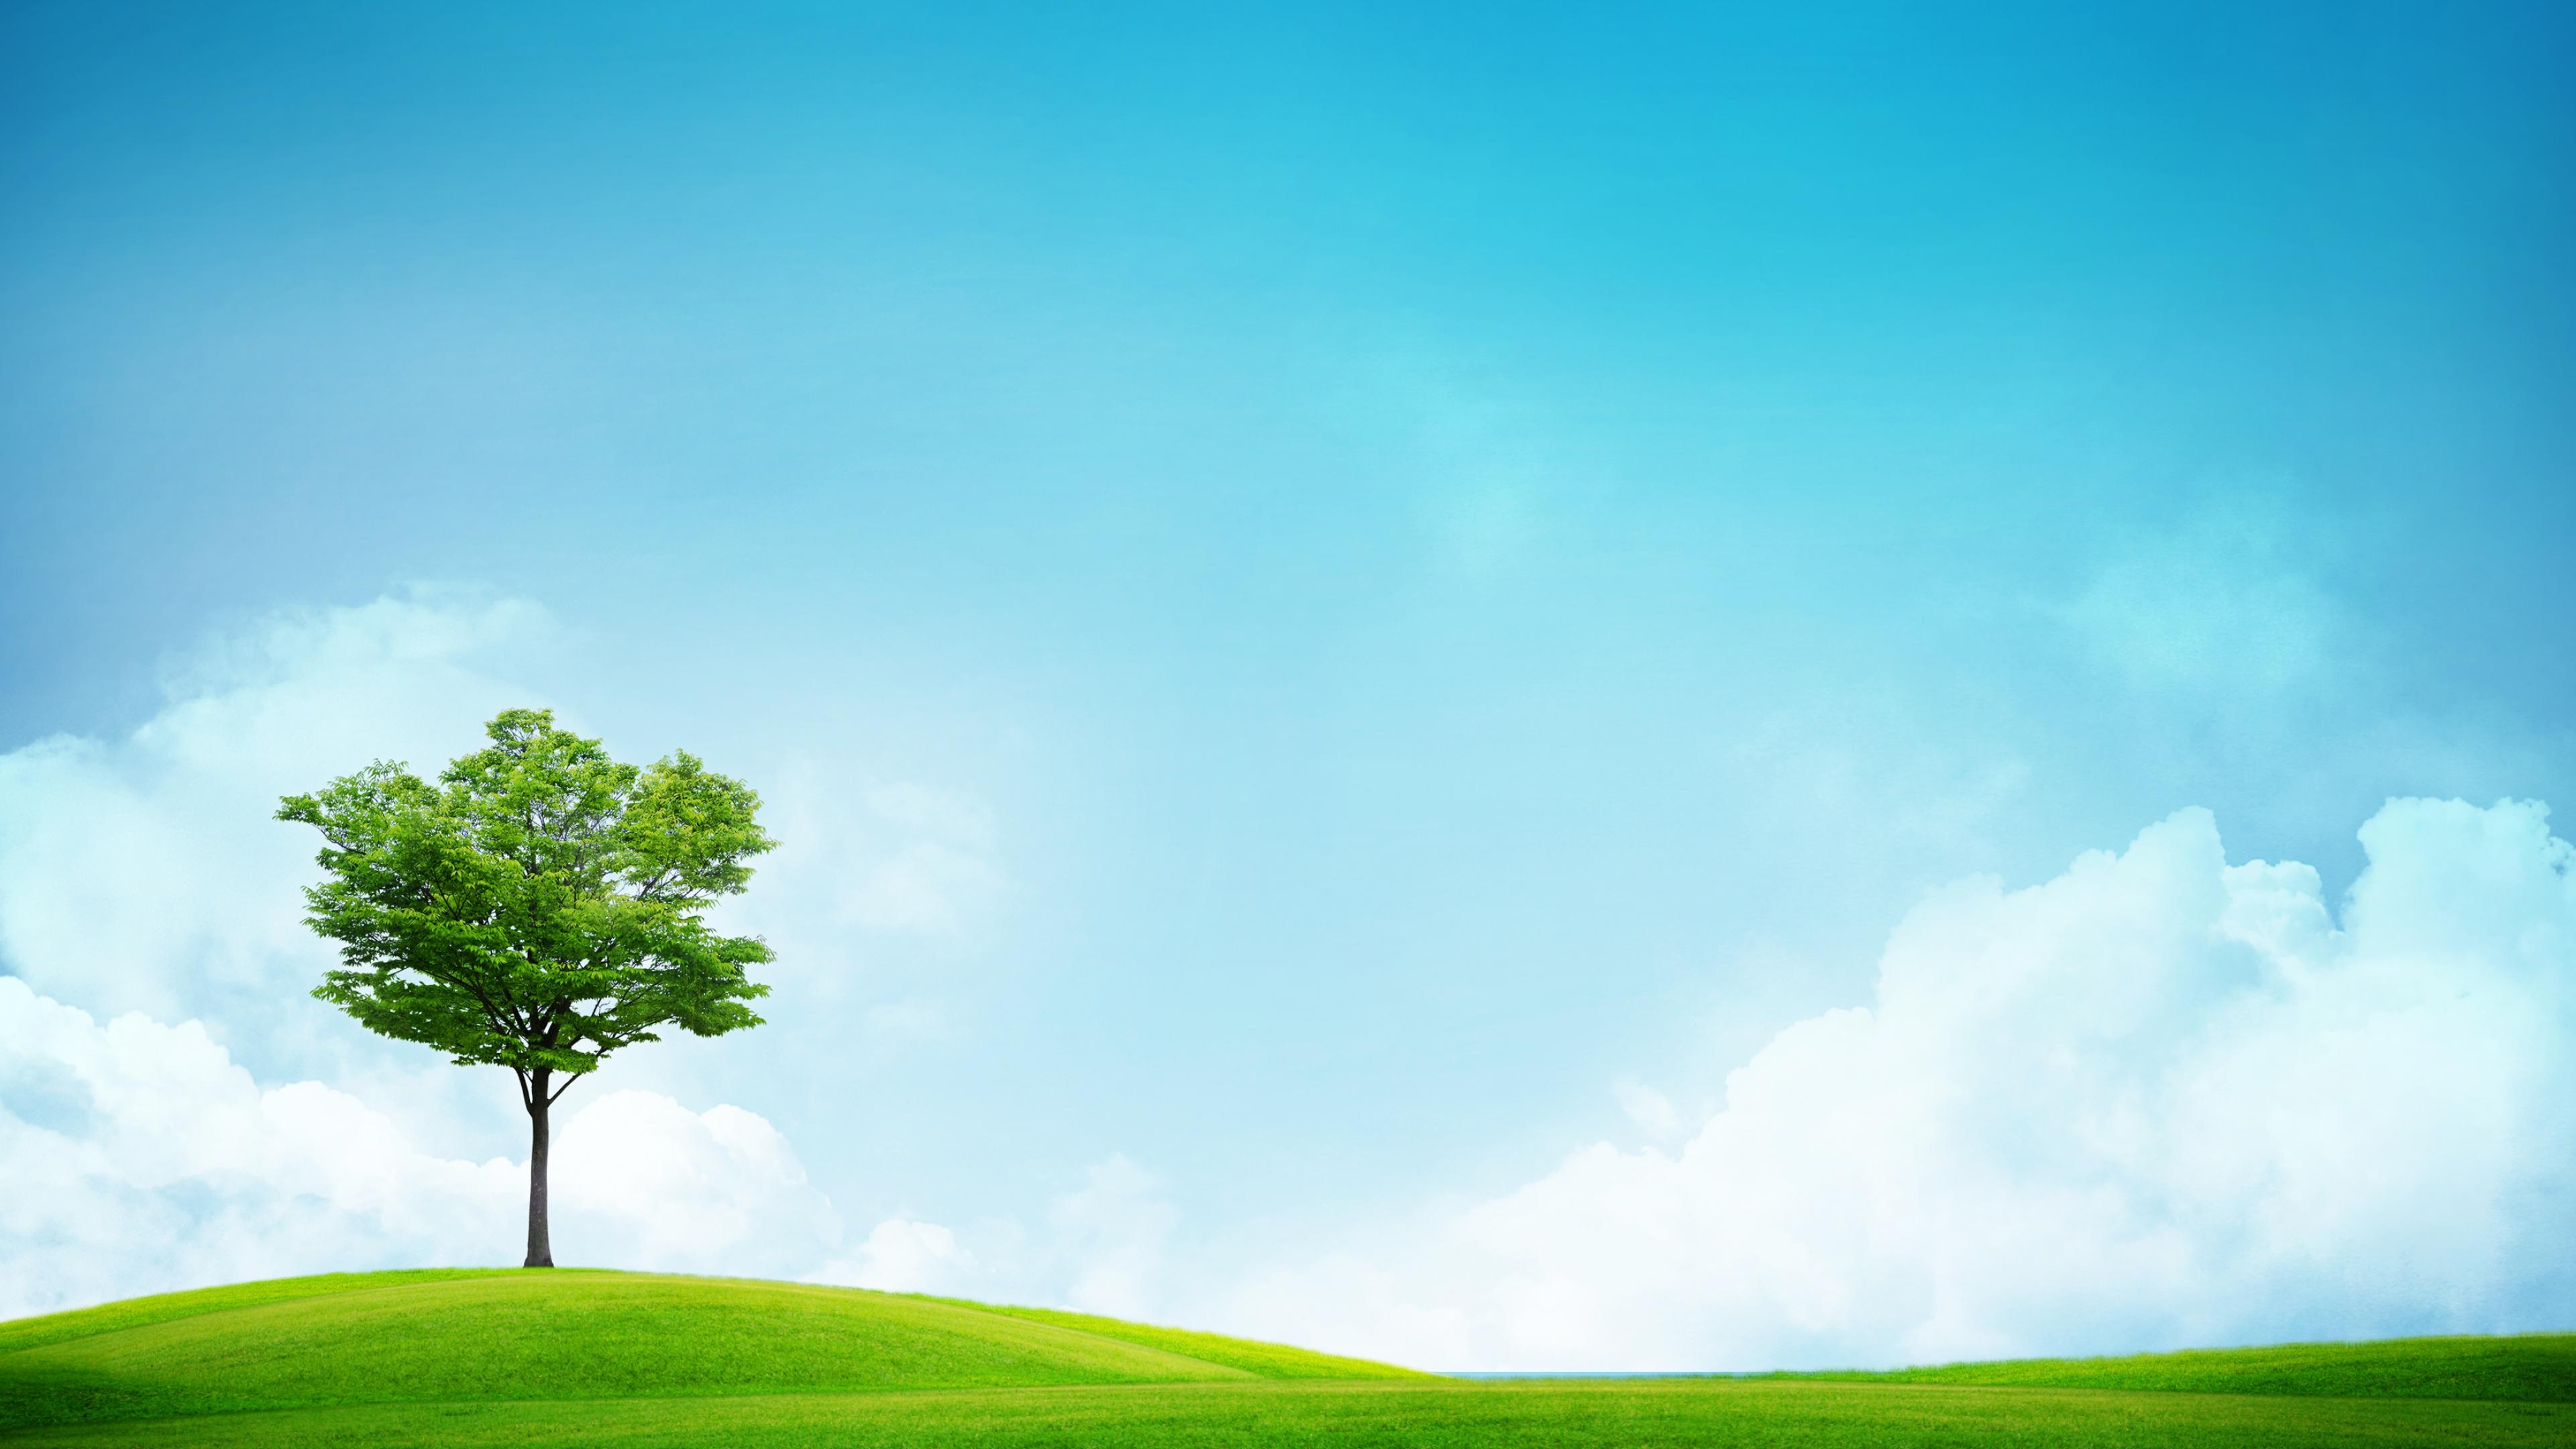 Grass and Sky: Scenery, Country setting, Natural surroundings, Green terrain. 3840x2160 4K Wallpaper.